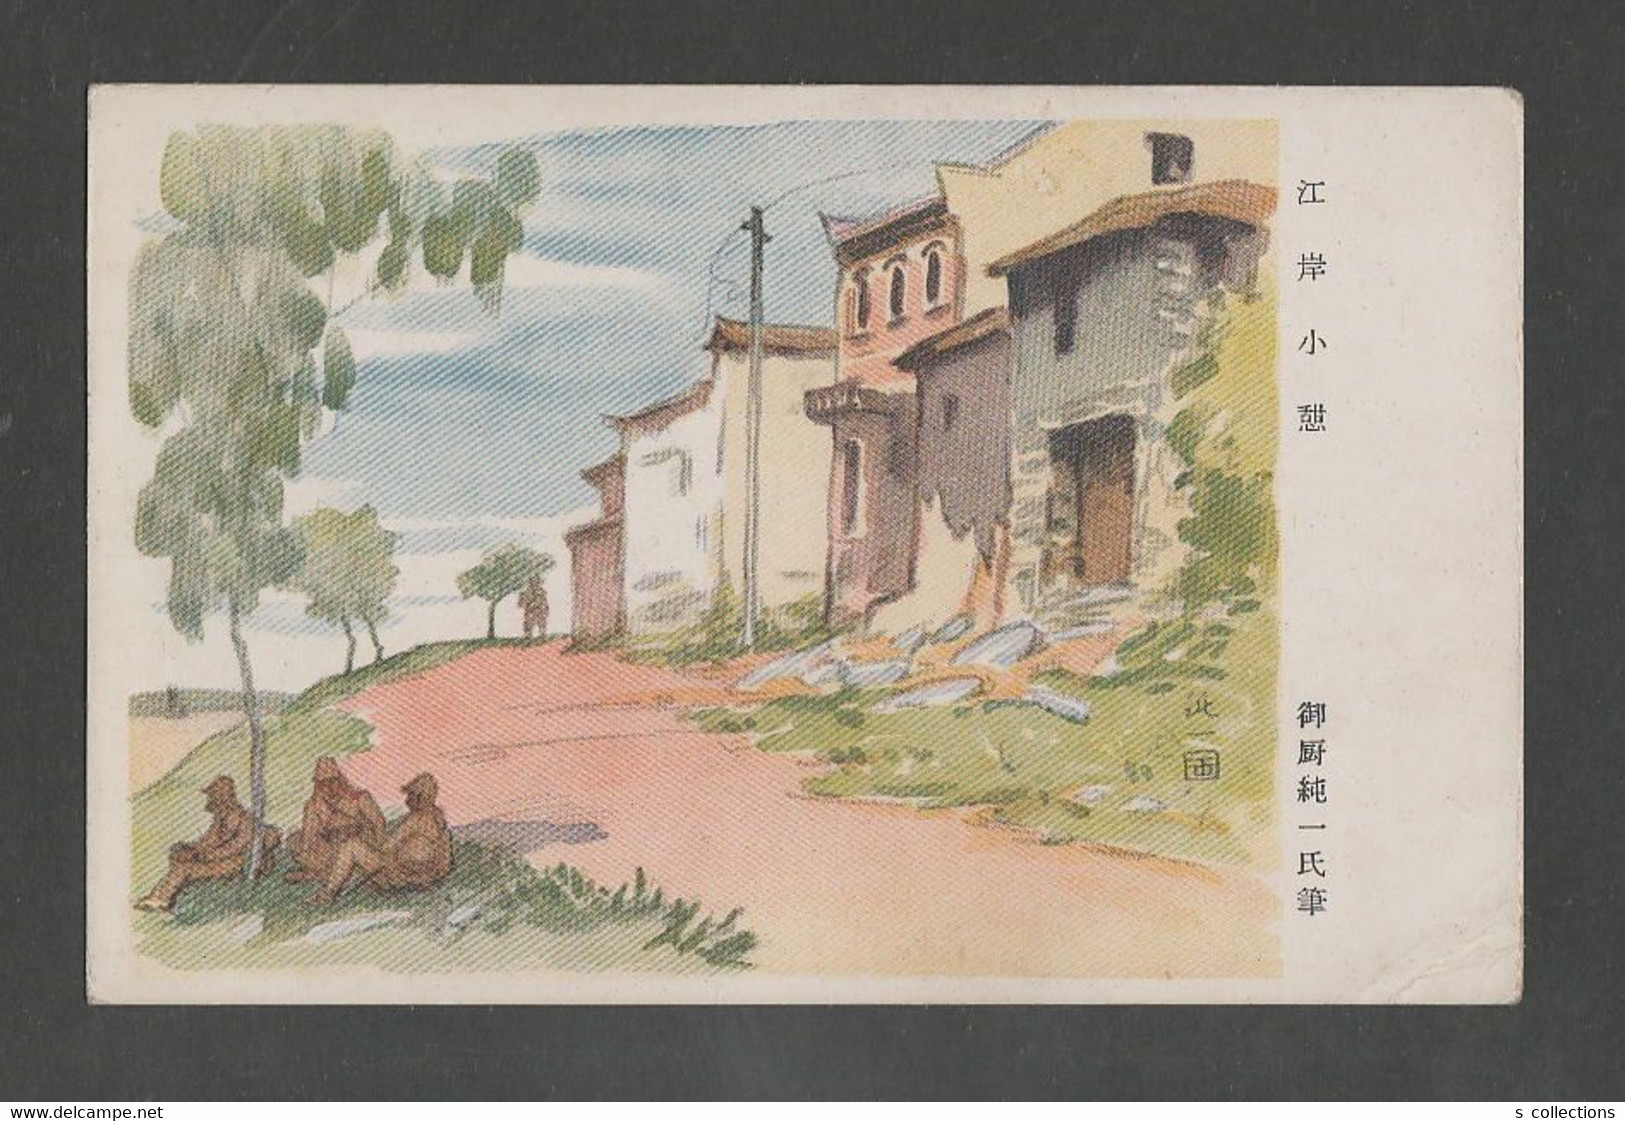 JAPAN WWII Military Jiang'an Picture Postcard NORTH CHINA WW2 MANCHURIA CHINE MANDCHOUKOUO JAPON GIAPPONE - 1941-45 Noord-China